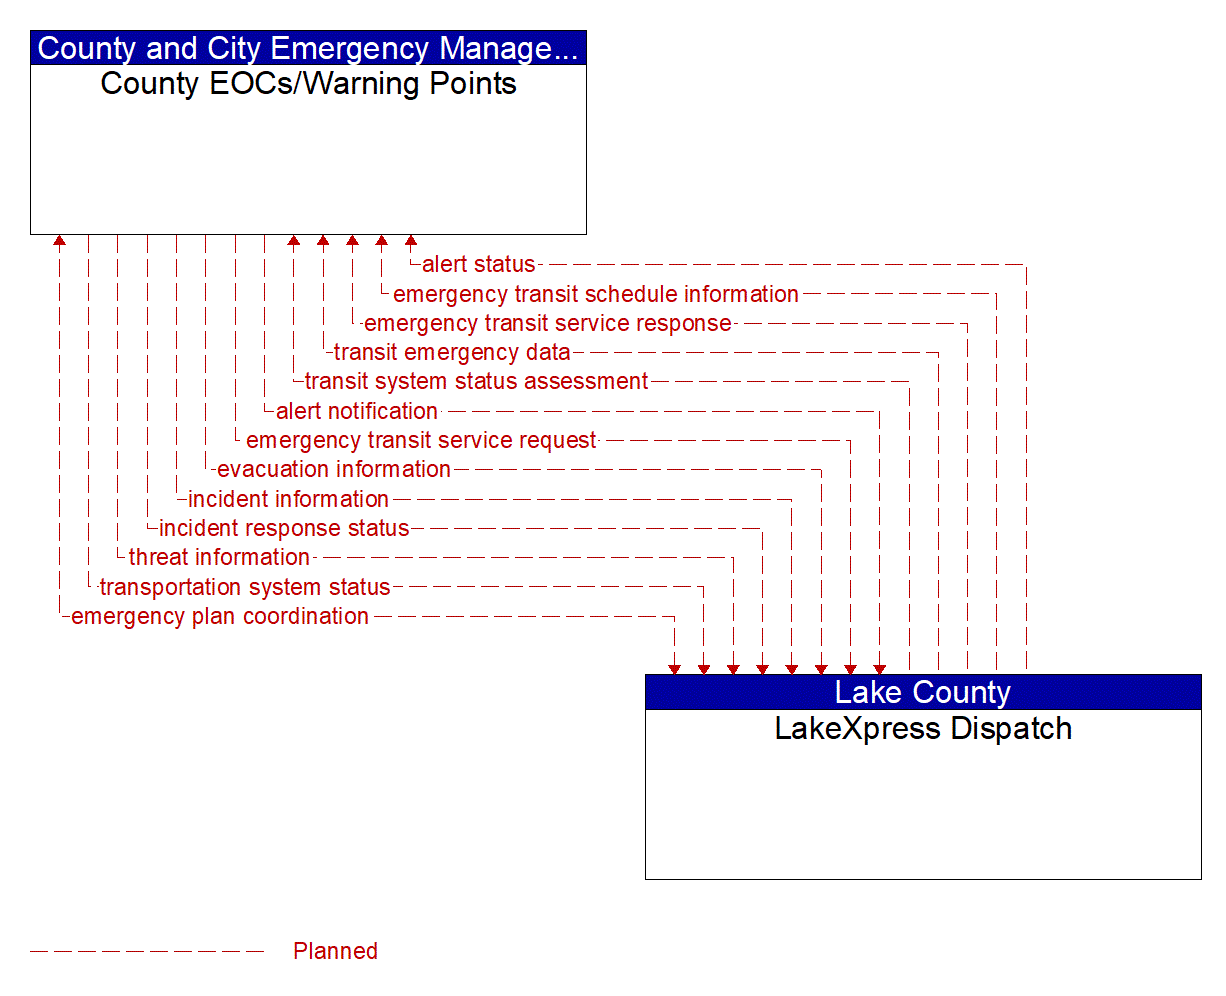 Architecture Flow Diagram: LakeXpress Dispatch <--> County EOCs/Warning Points